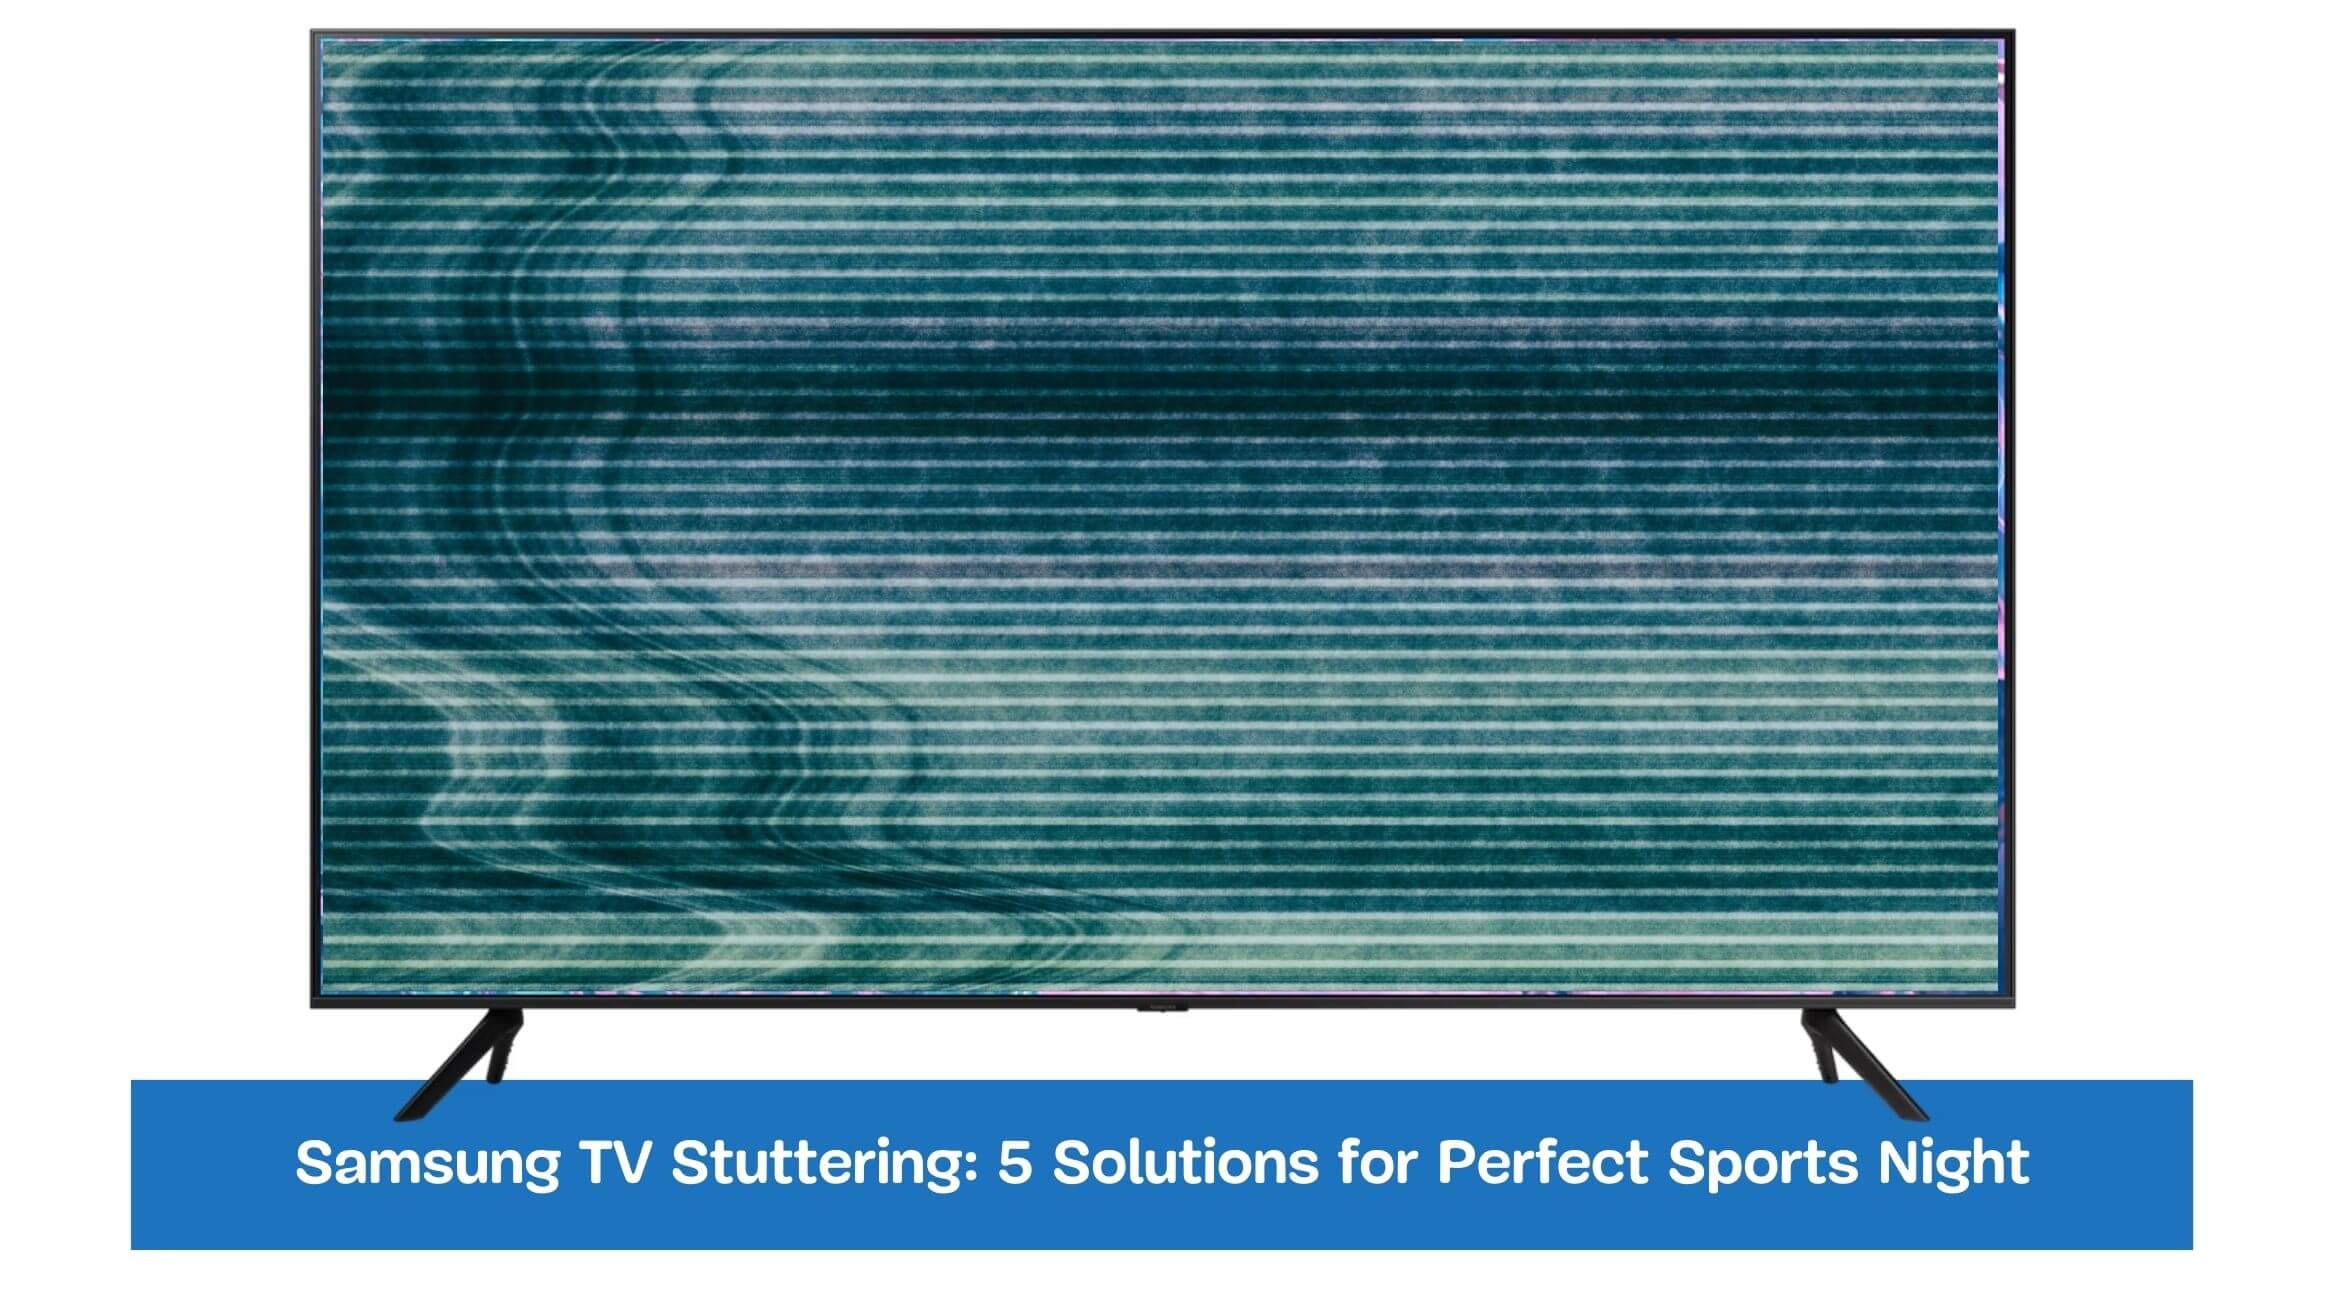 Samsung TV Stuttering: 5 Solutions for Perfect Sports Night